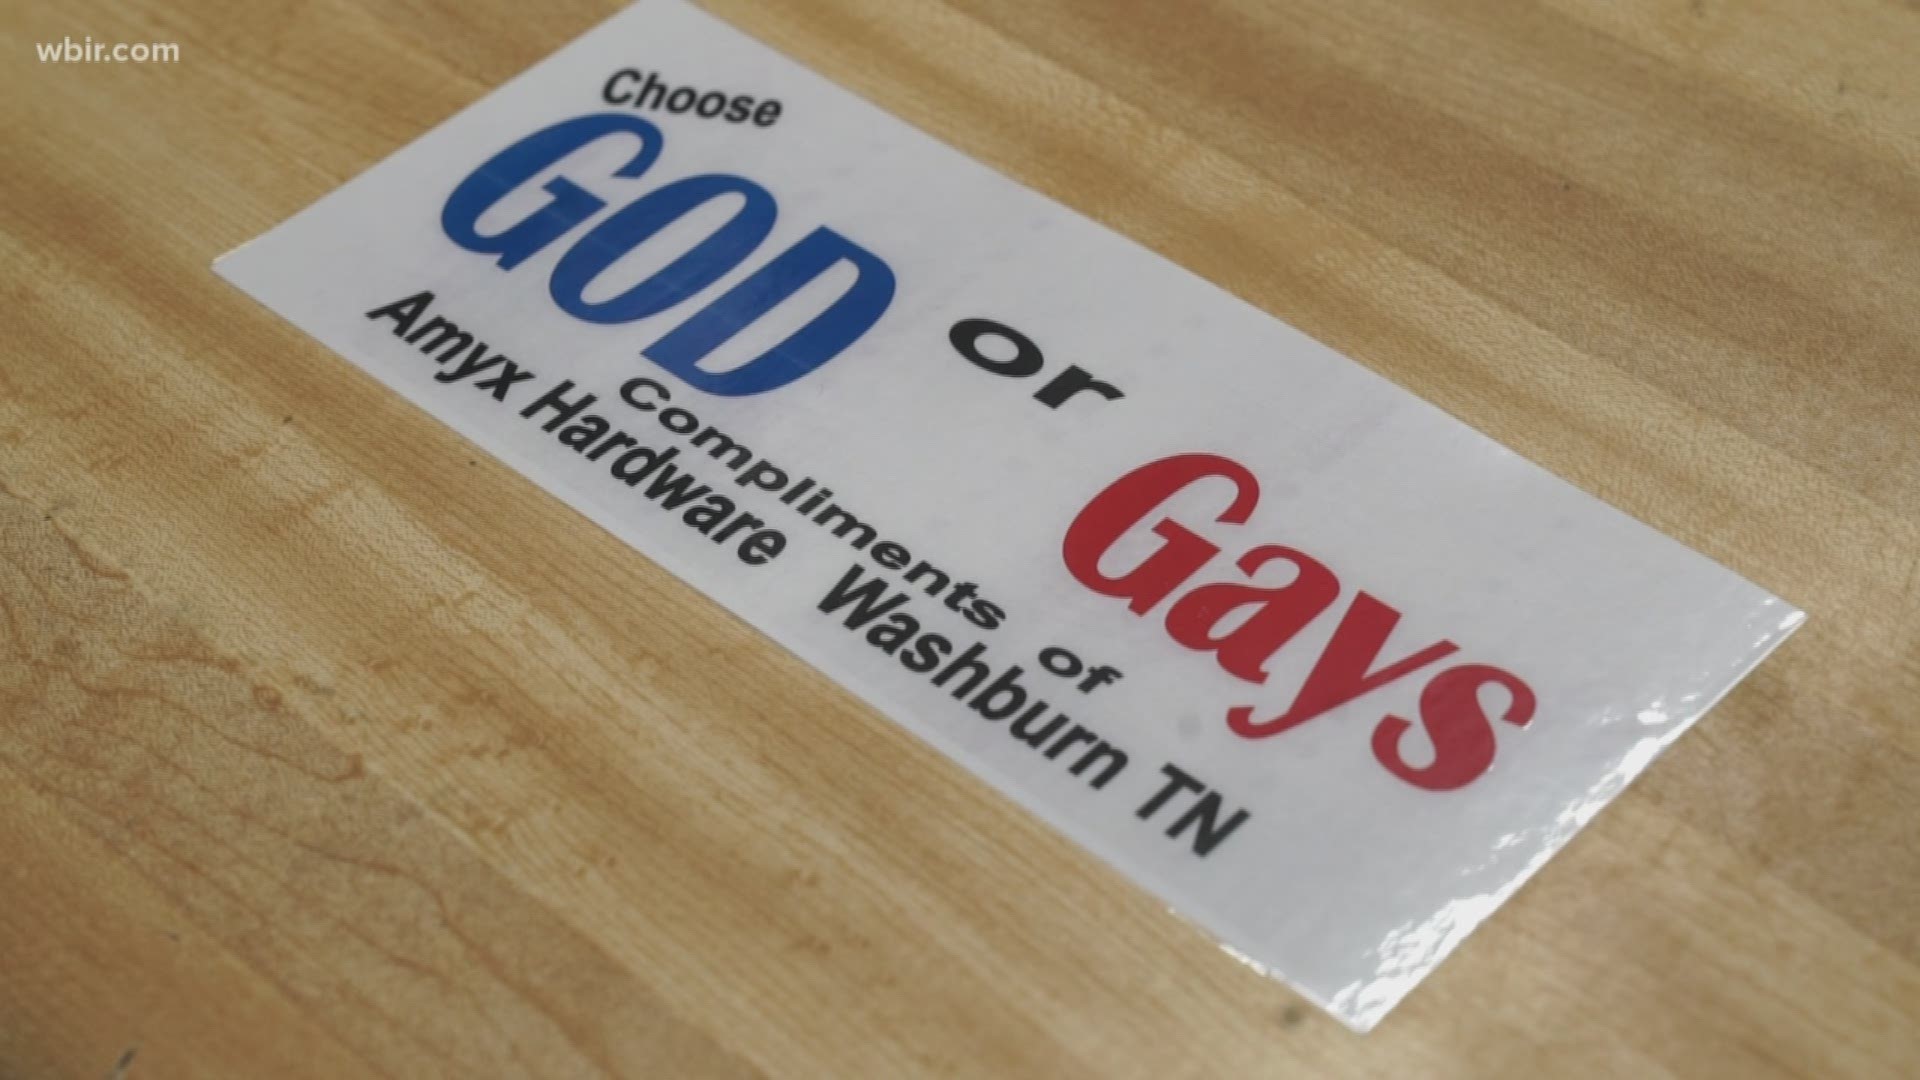 When the supreme court ruled to make gay marriage legal in 2015..Jeff Amyx made sure everyone entering his hardware store knew what he believed. Today's decision is a brought a different emotion